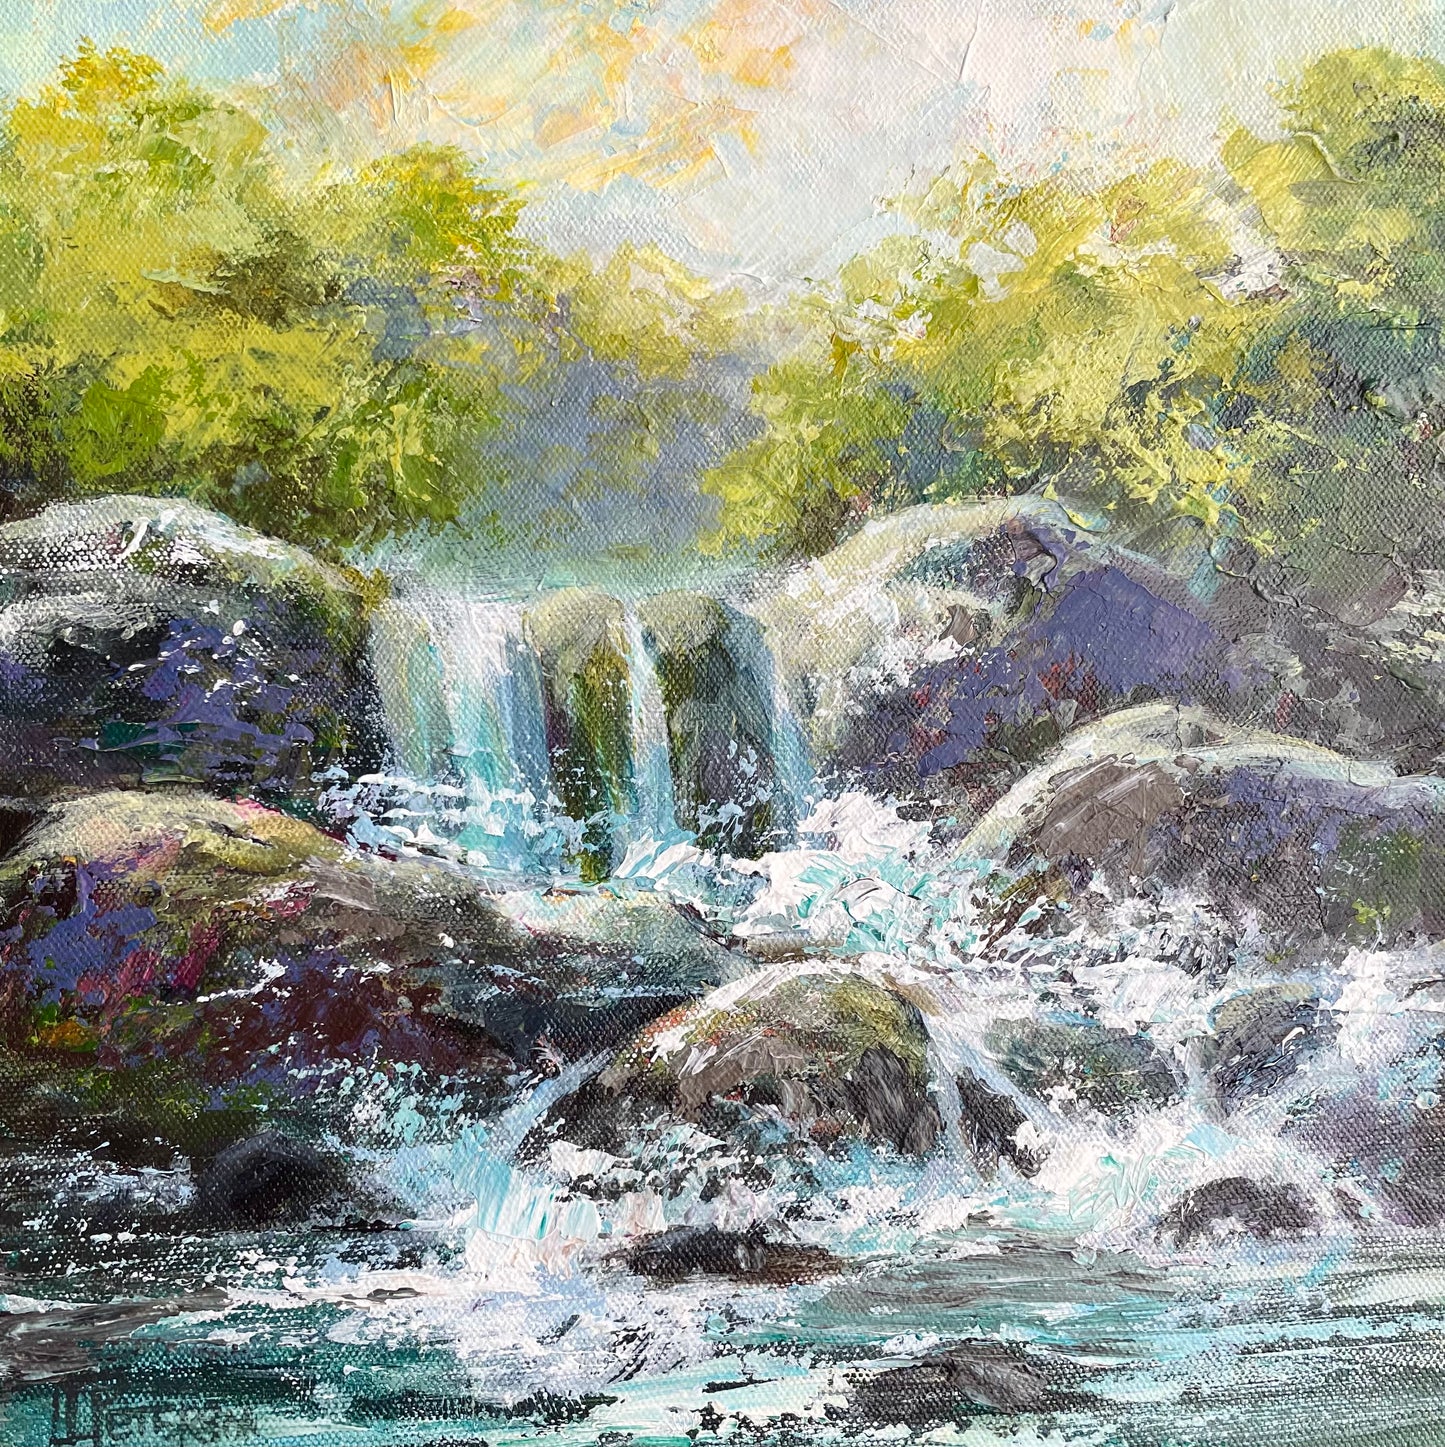 Rocks and Water Painting Class- Thursday, April 28th @7pm